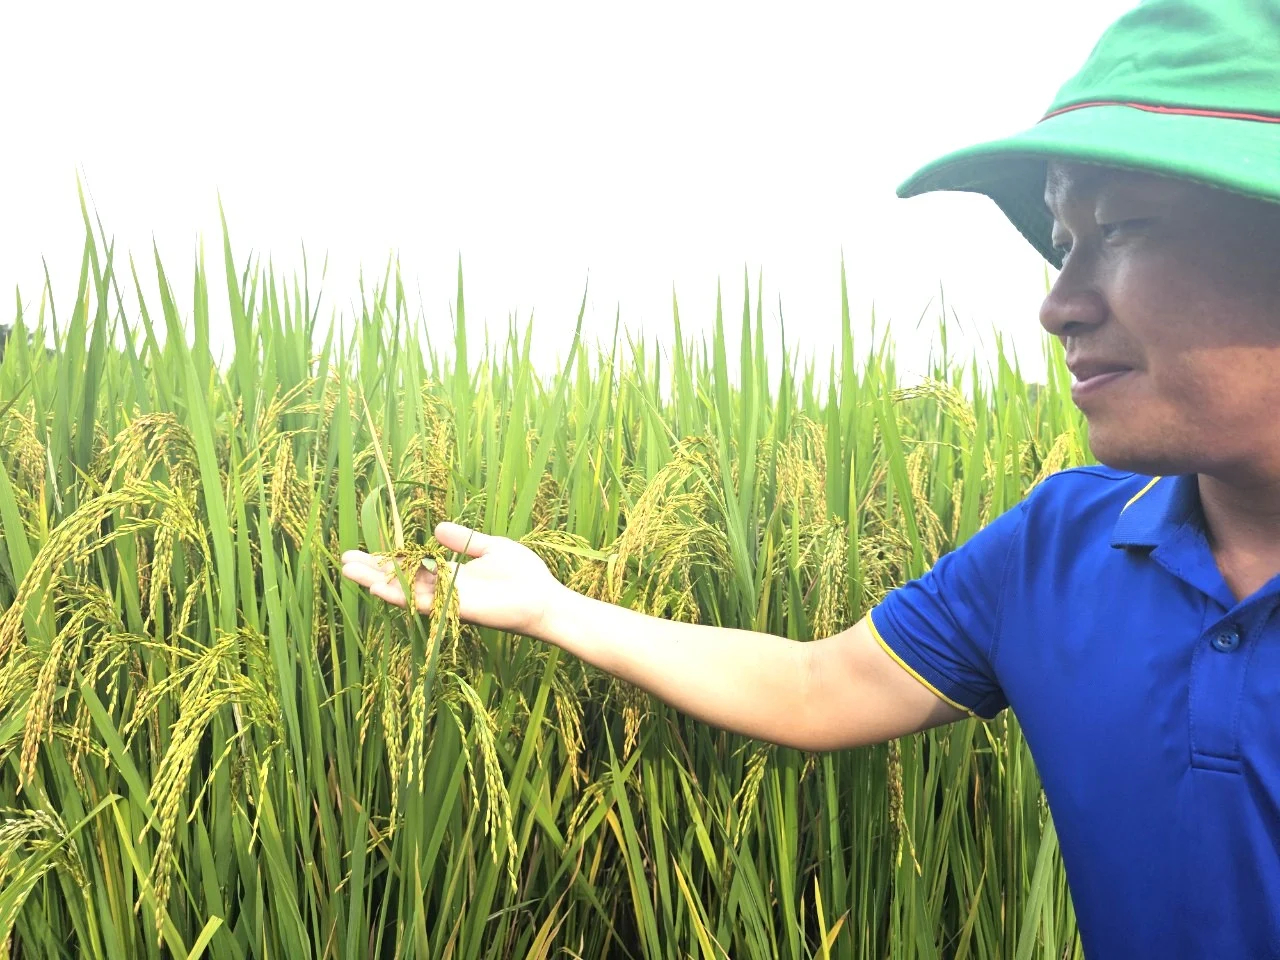 Organically produced rice areas are very pest-free. Photo: Hoang Anh.